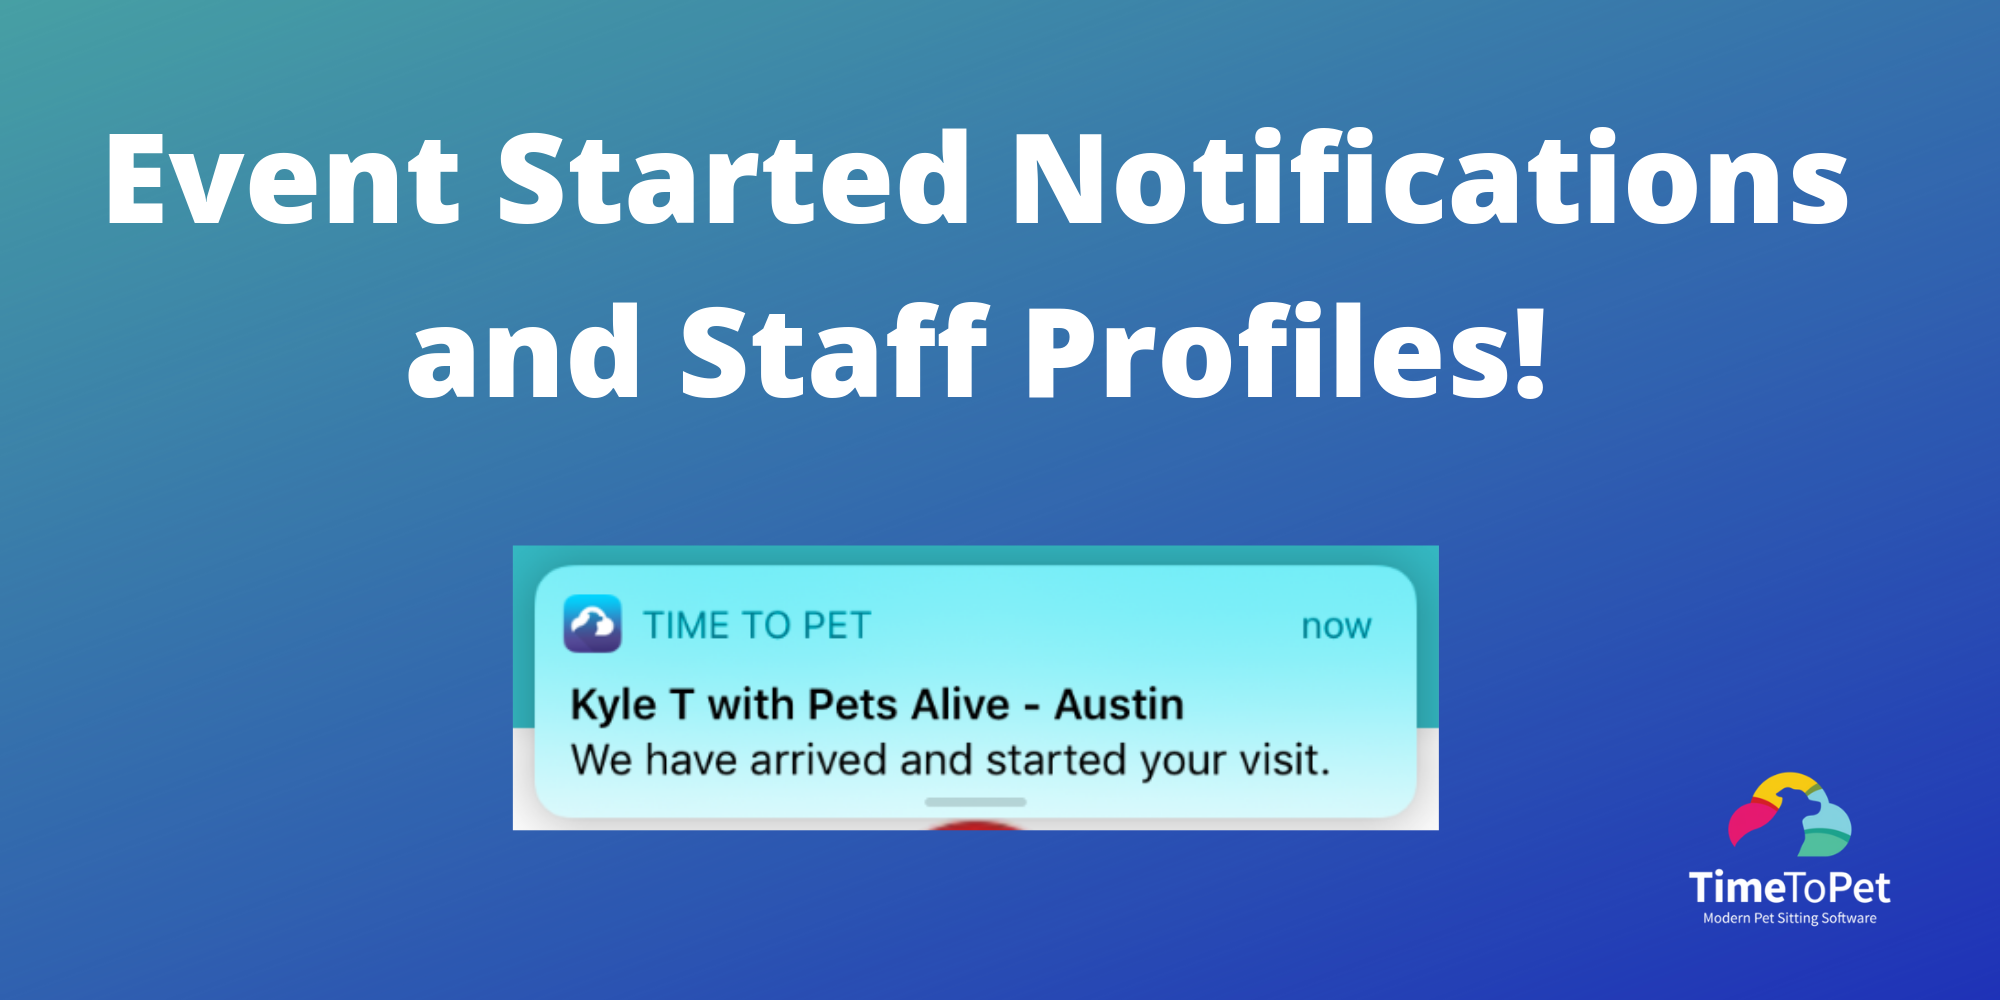 Event-Started-Notifications-and-Staff-Profiles.png